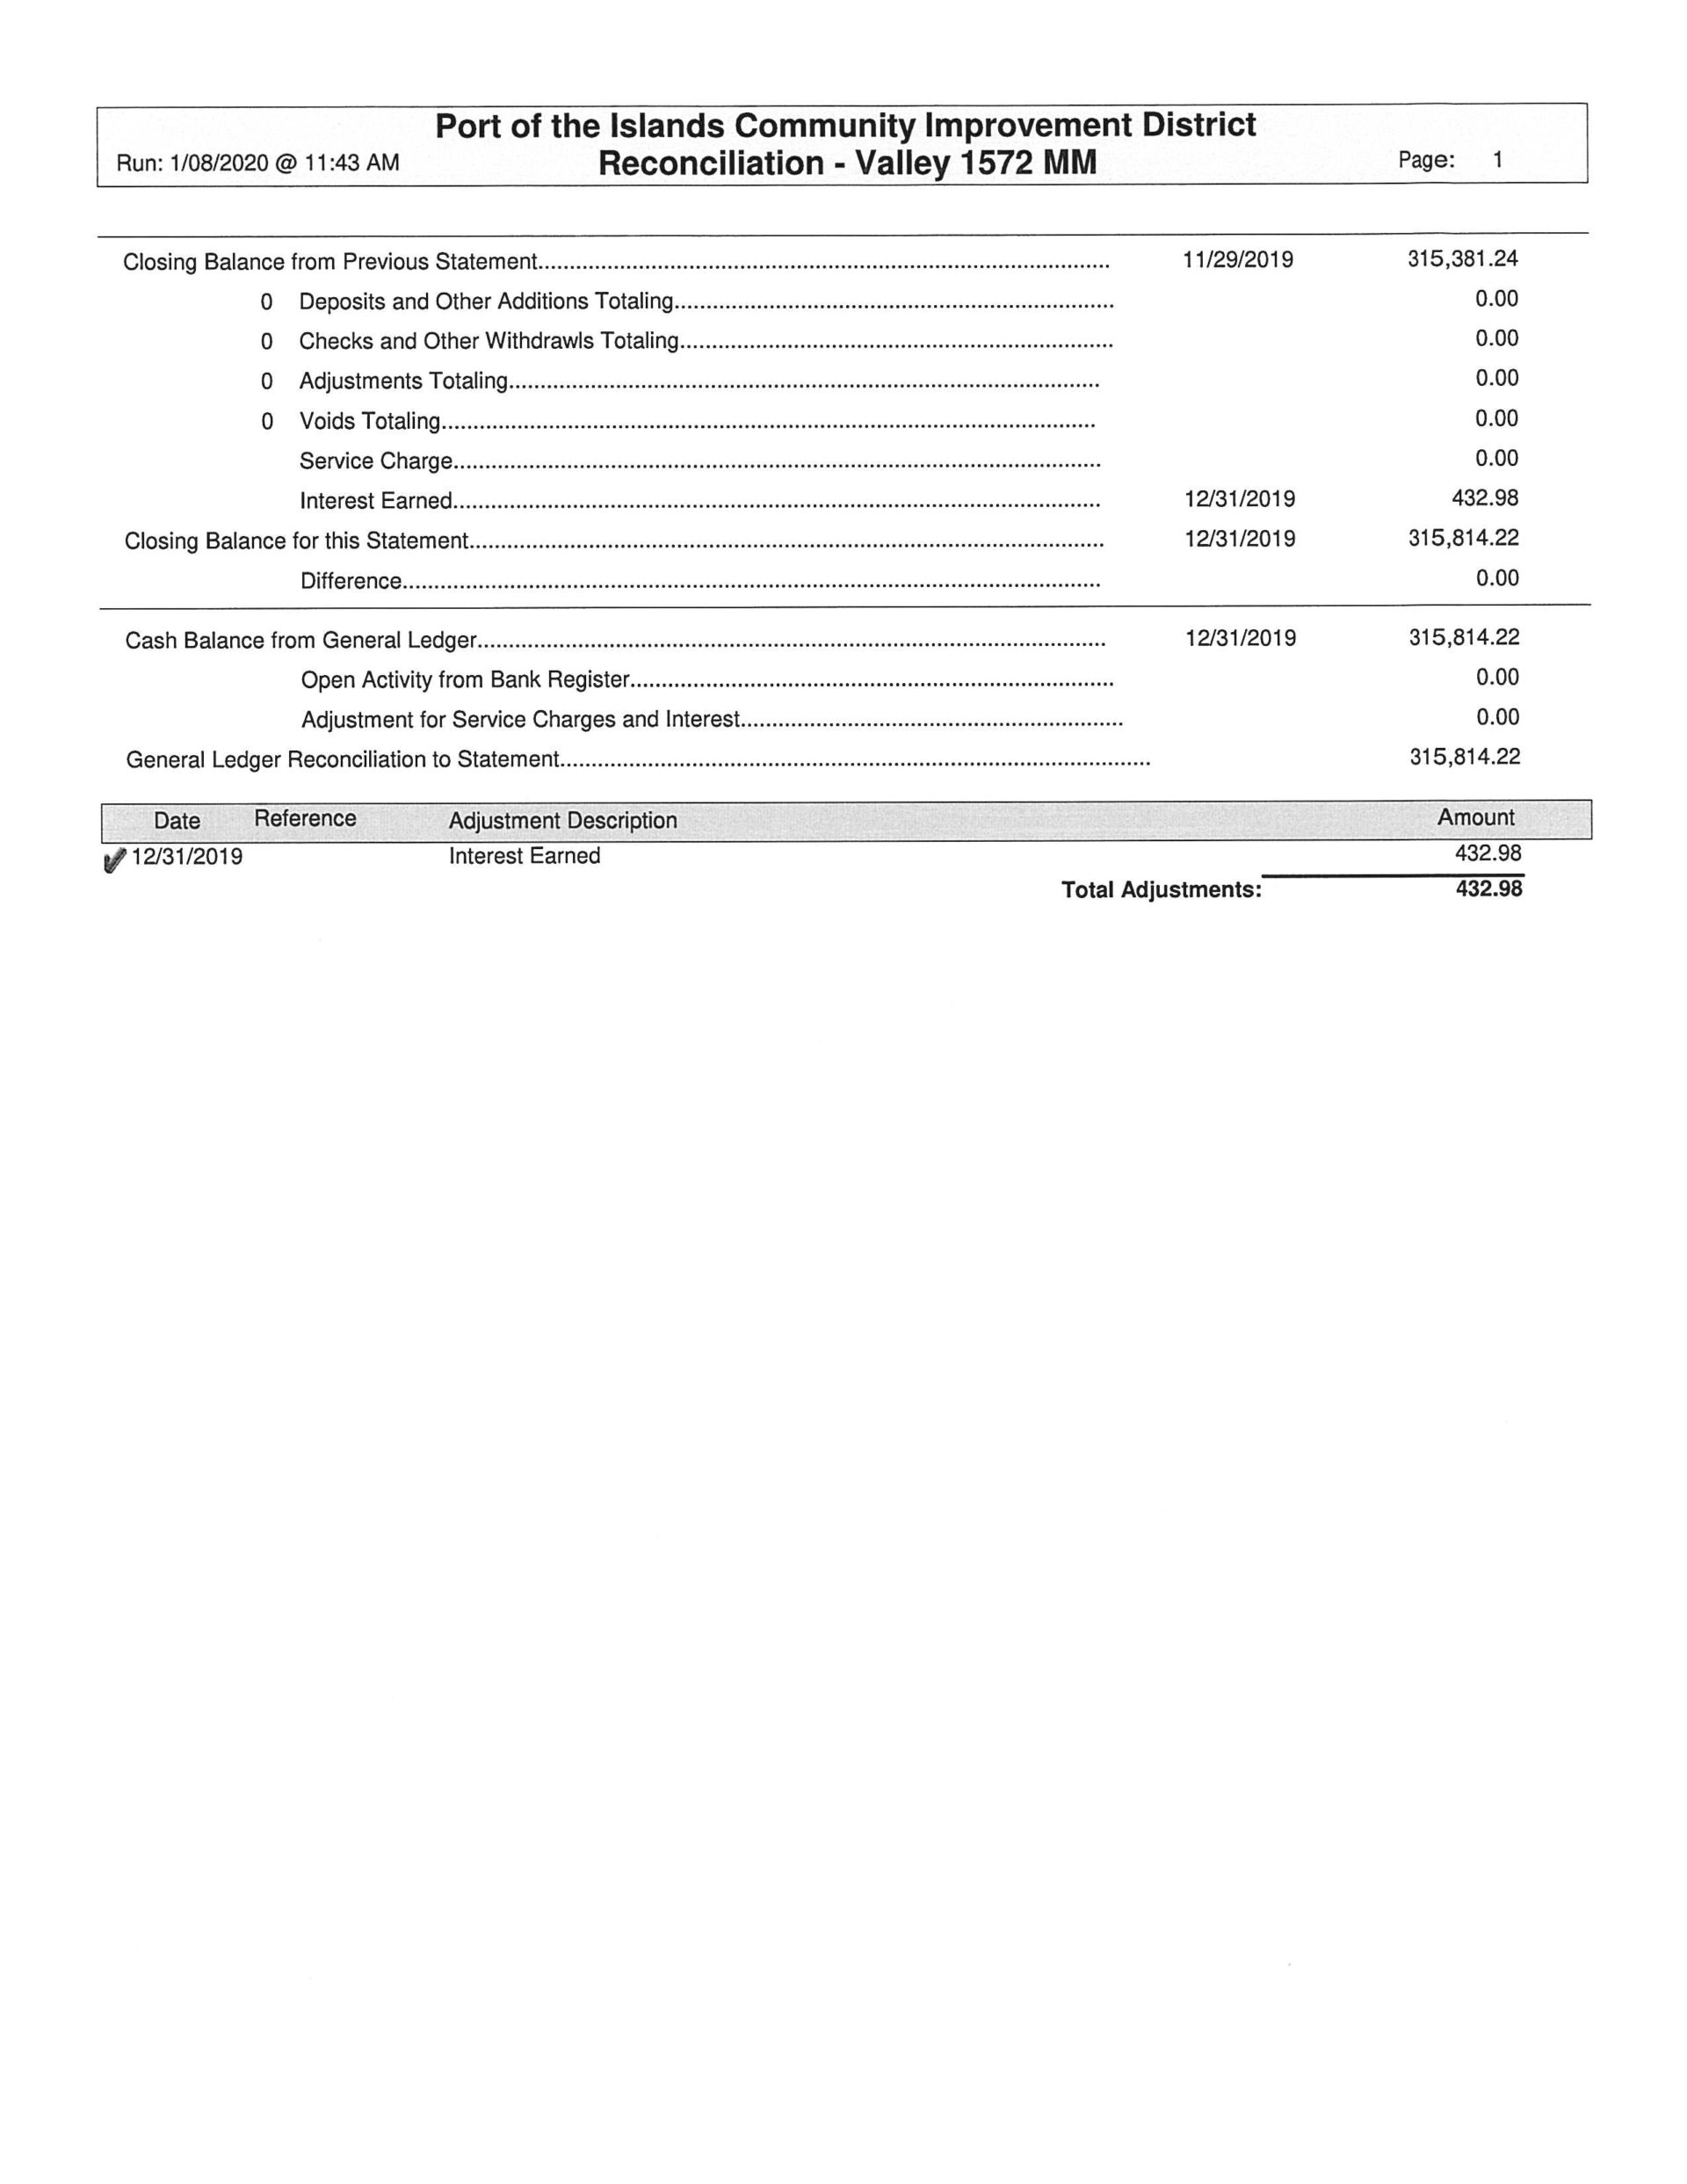 Port of the Islands Financial Report - December 2019 Bank Reconciliation